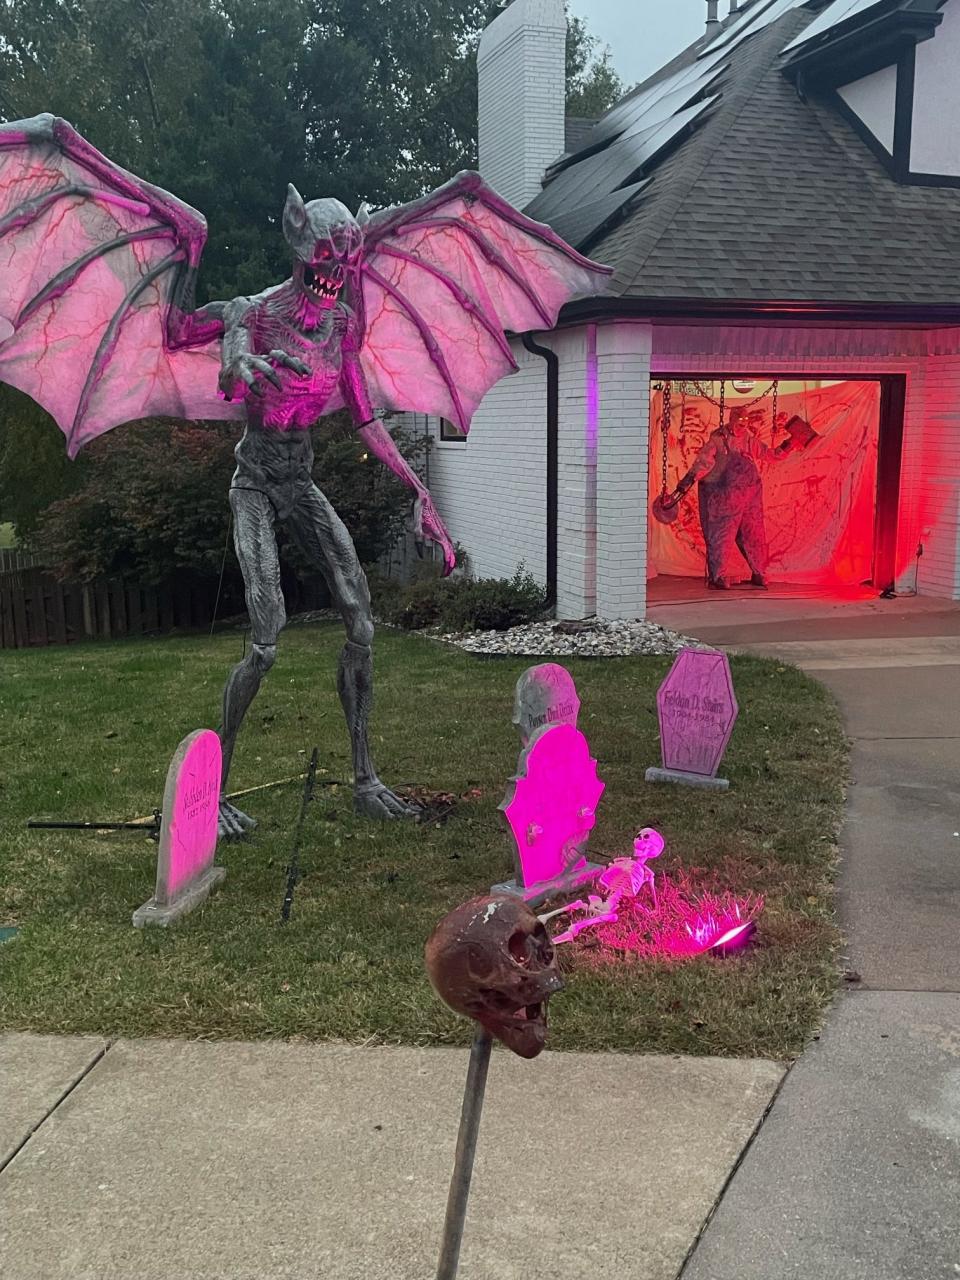 A large, winded demon-like creature stands in the front yard of 701 W. Bentwater Drive in Nixa.